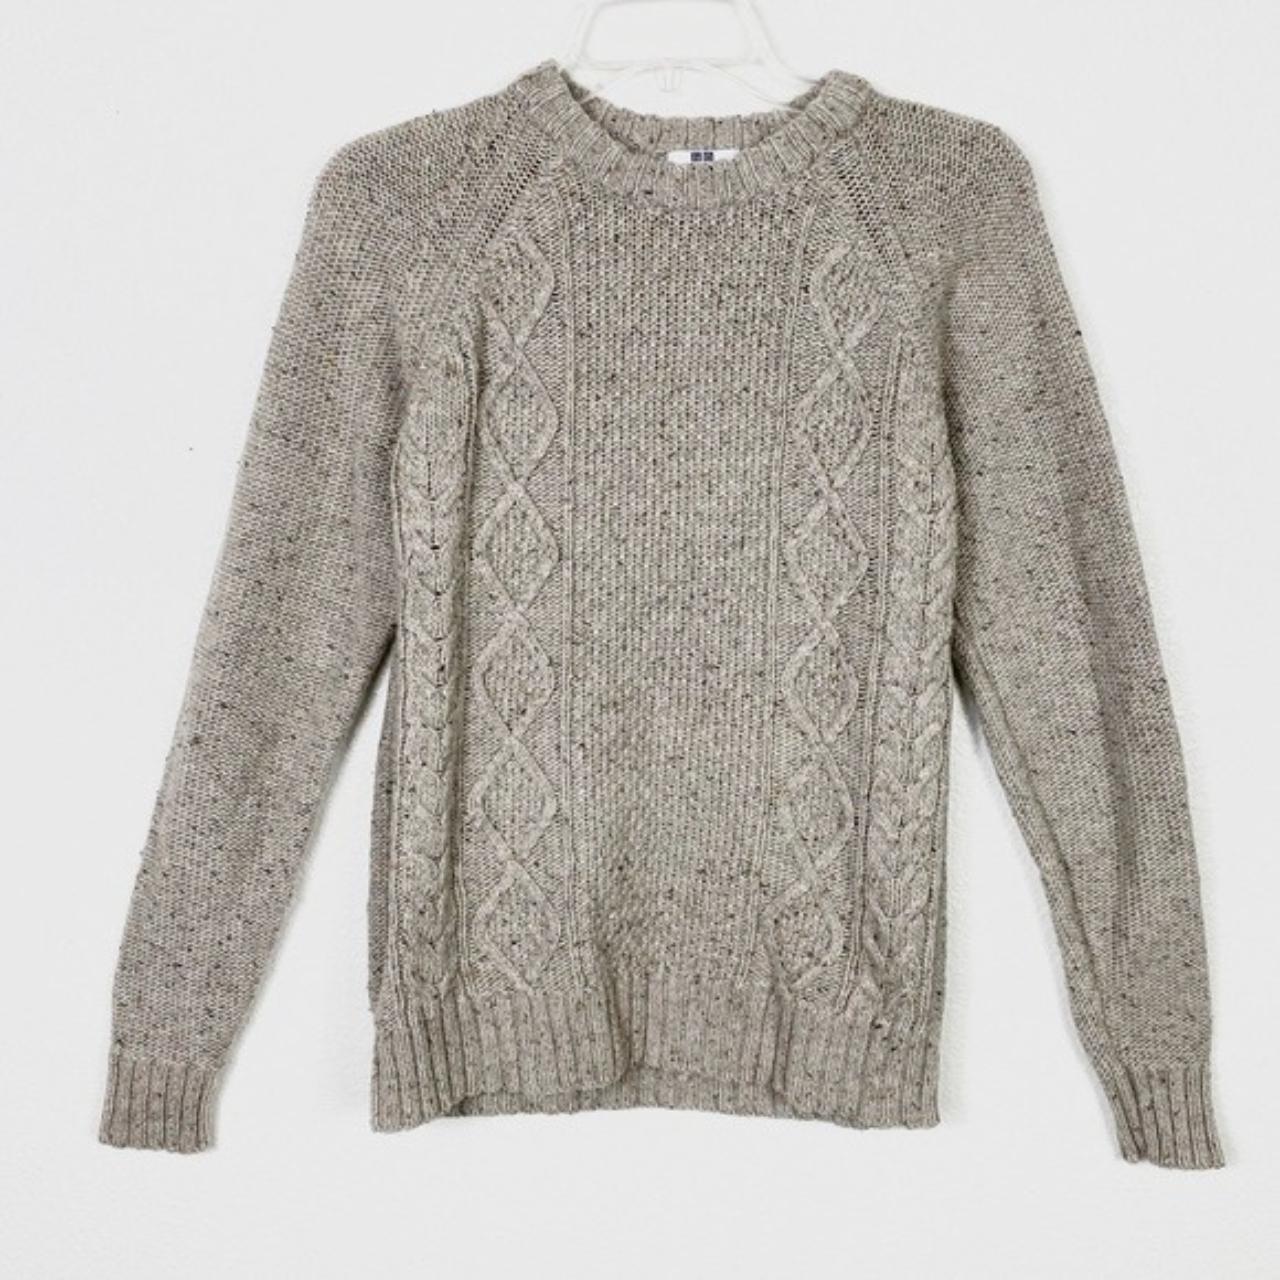 Uniqlo Tan Cable Knit Wool Blend Sweater Gently used... - Depop